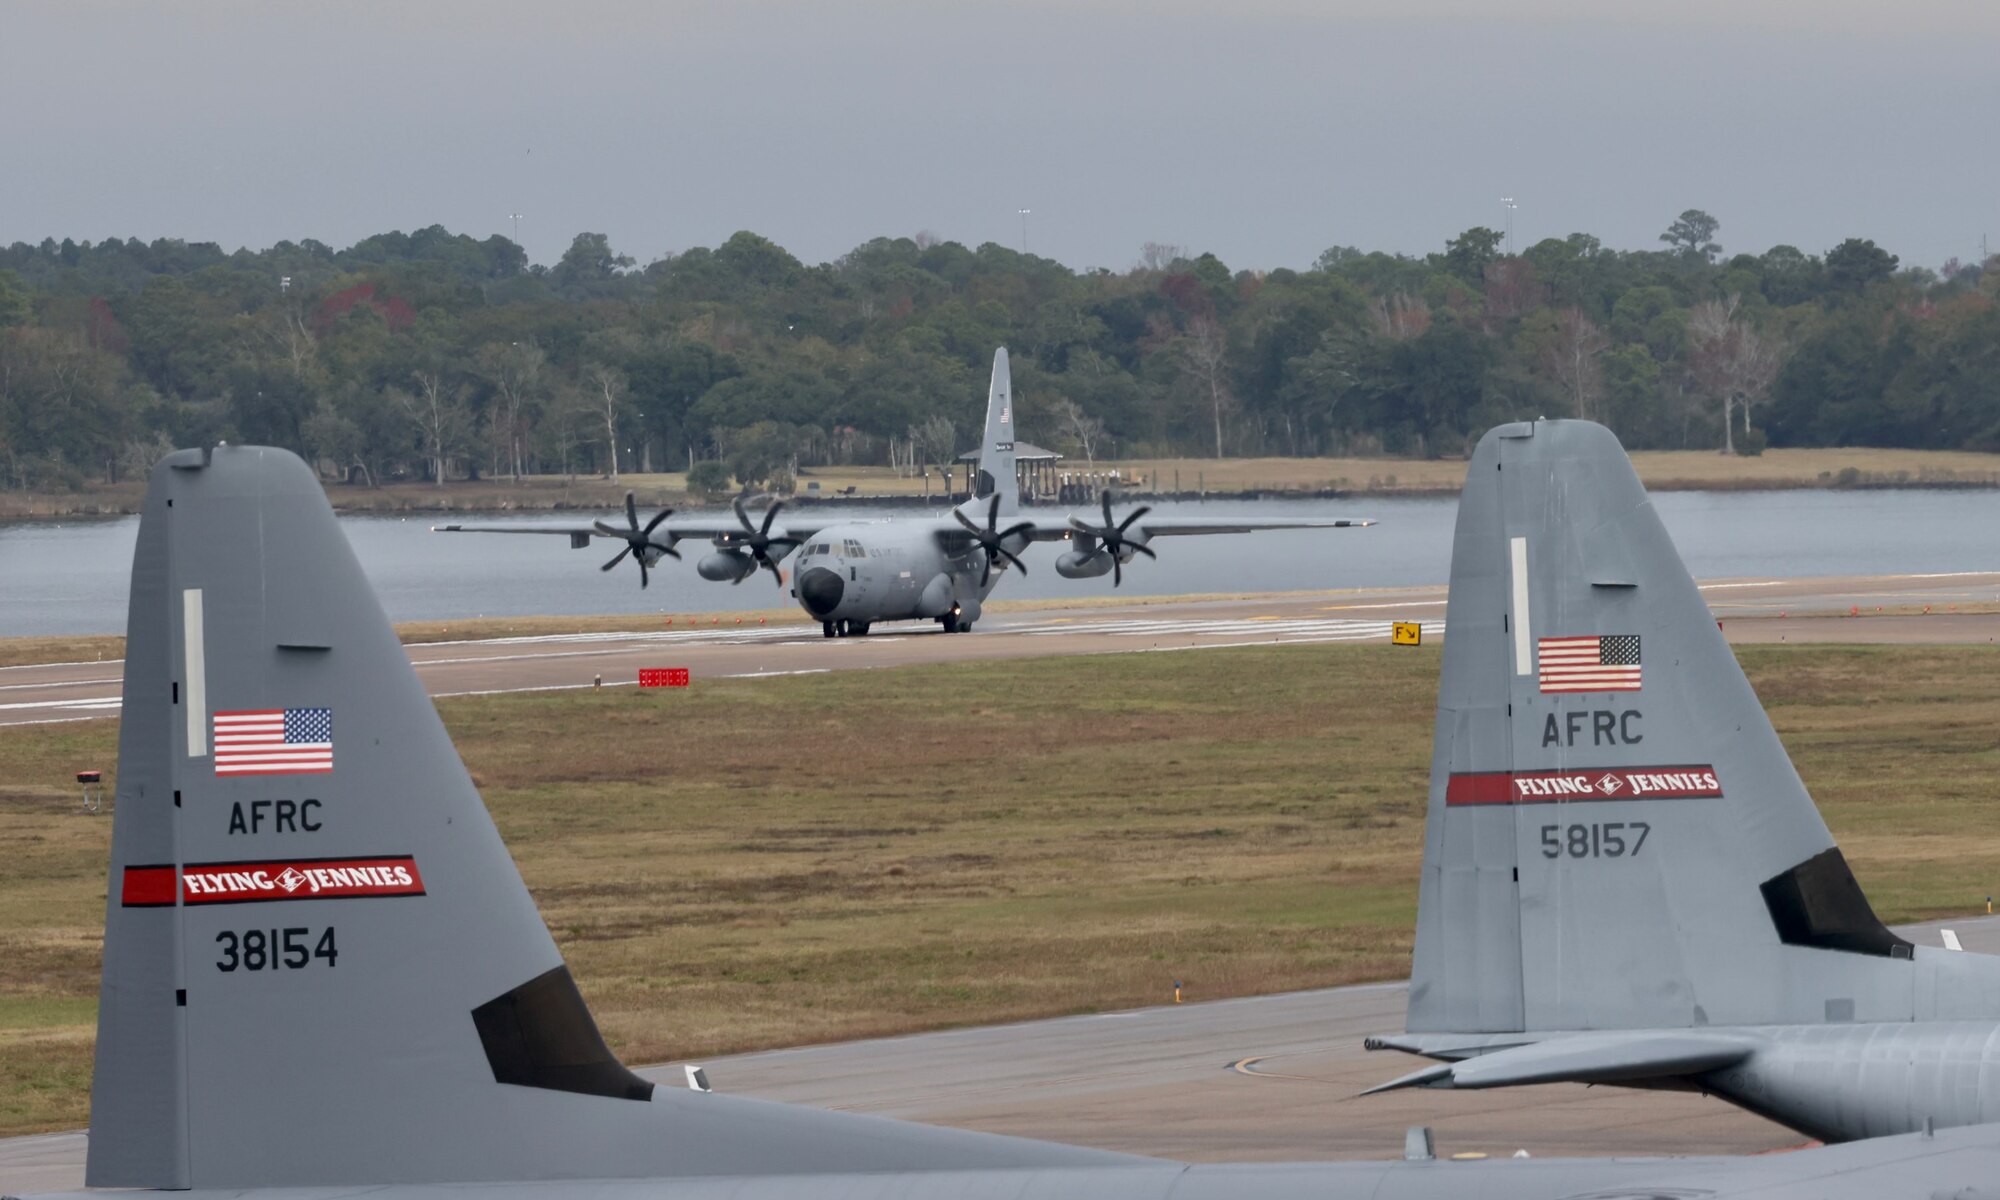 A WC-130J aircraft takes off